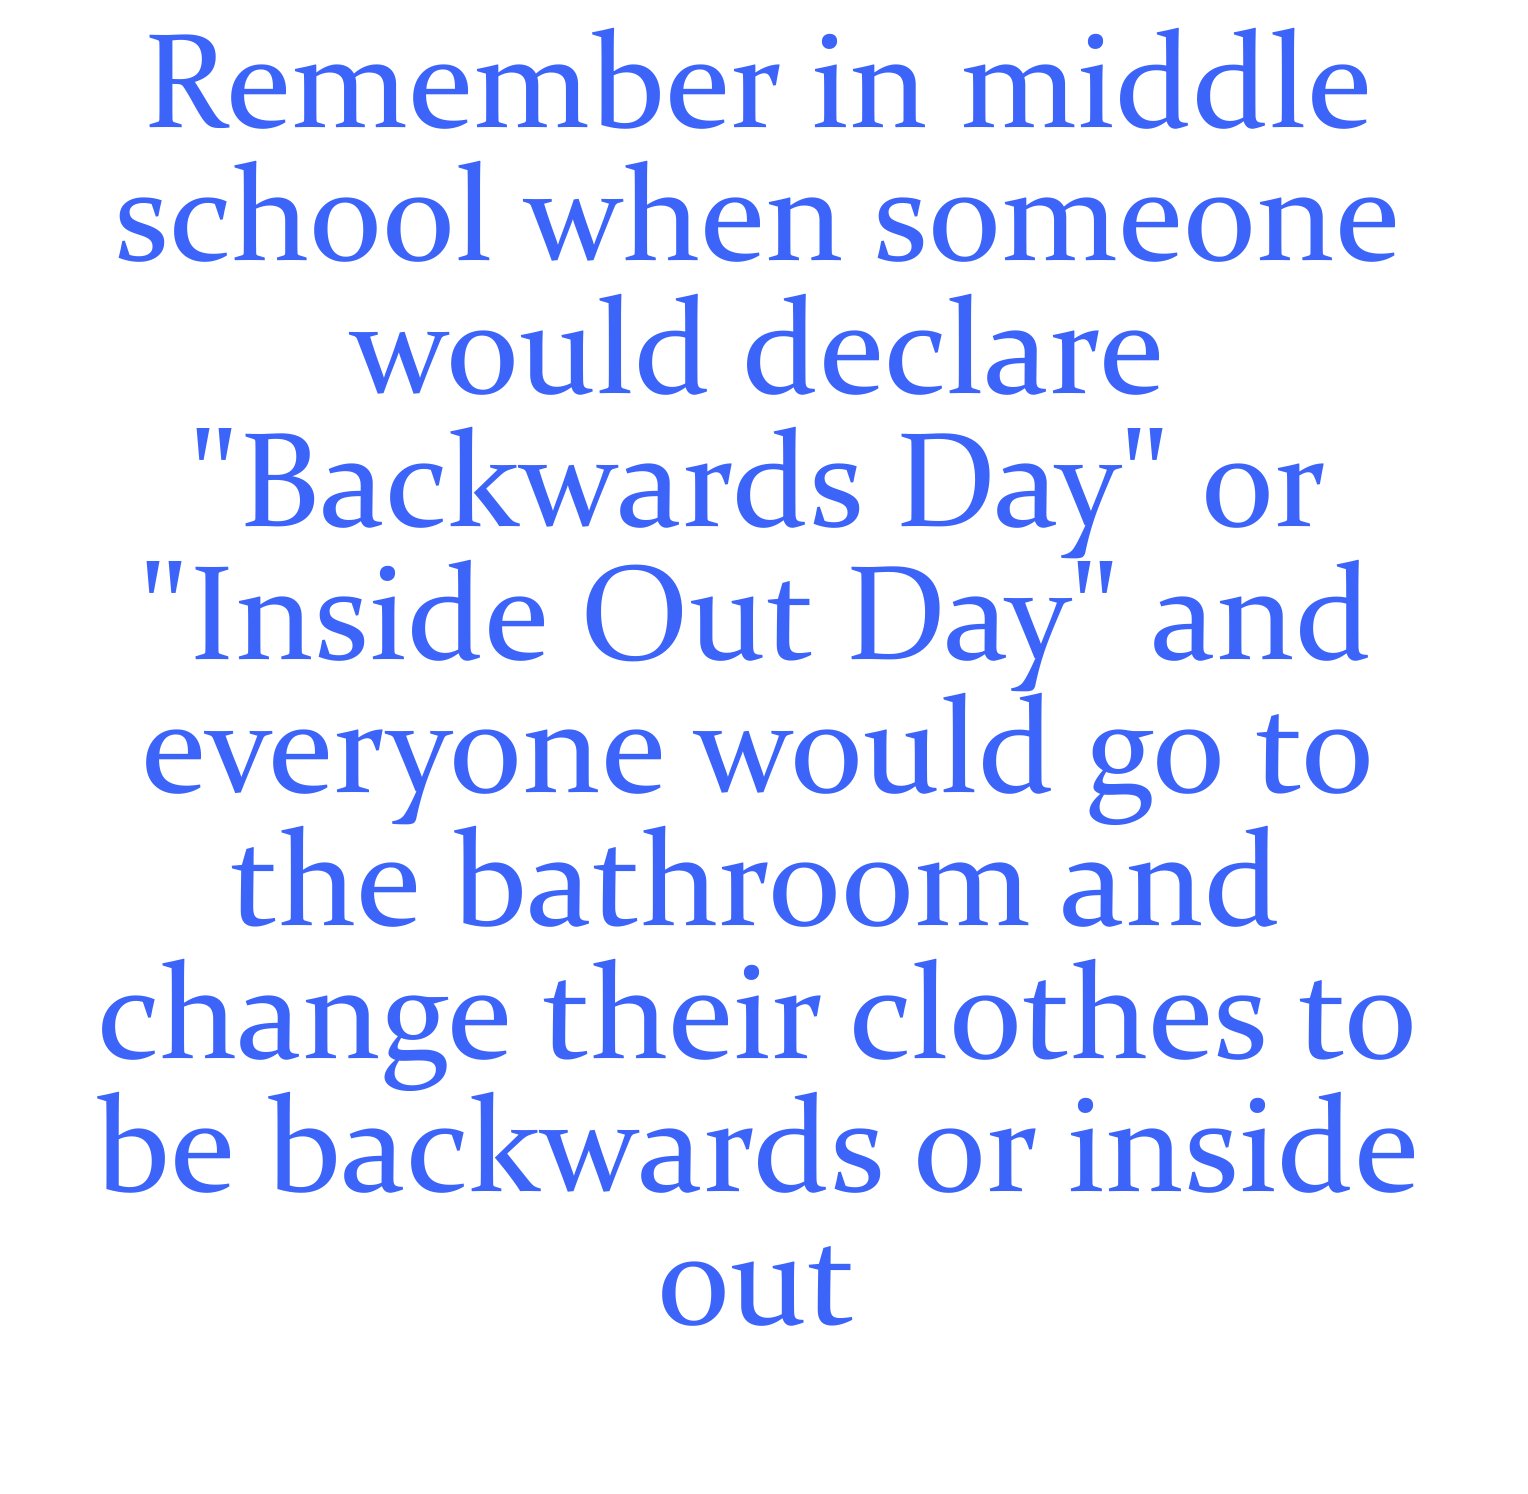 everything in life is temporary - Remember in middle school when someone would declare "Backwards Day" or "Inside Out Day" and everyone would go to the bathroom and change their clothes to be backwards or inside out